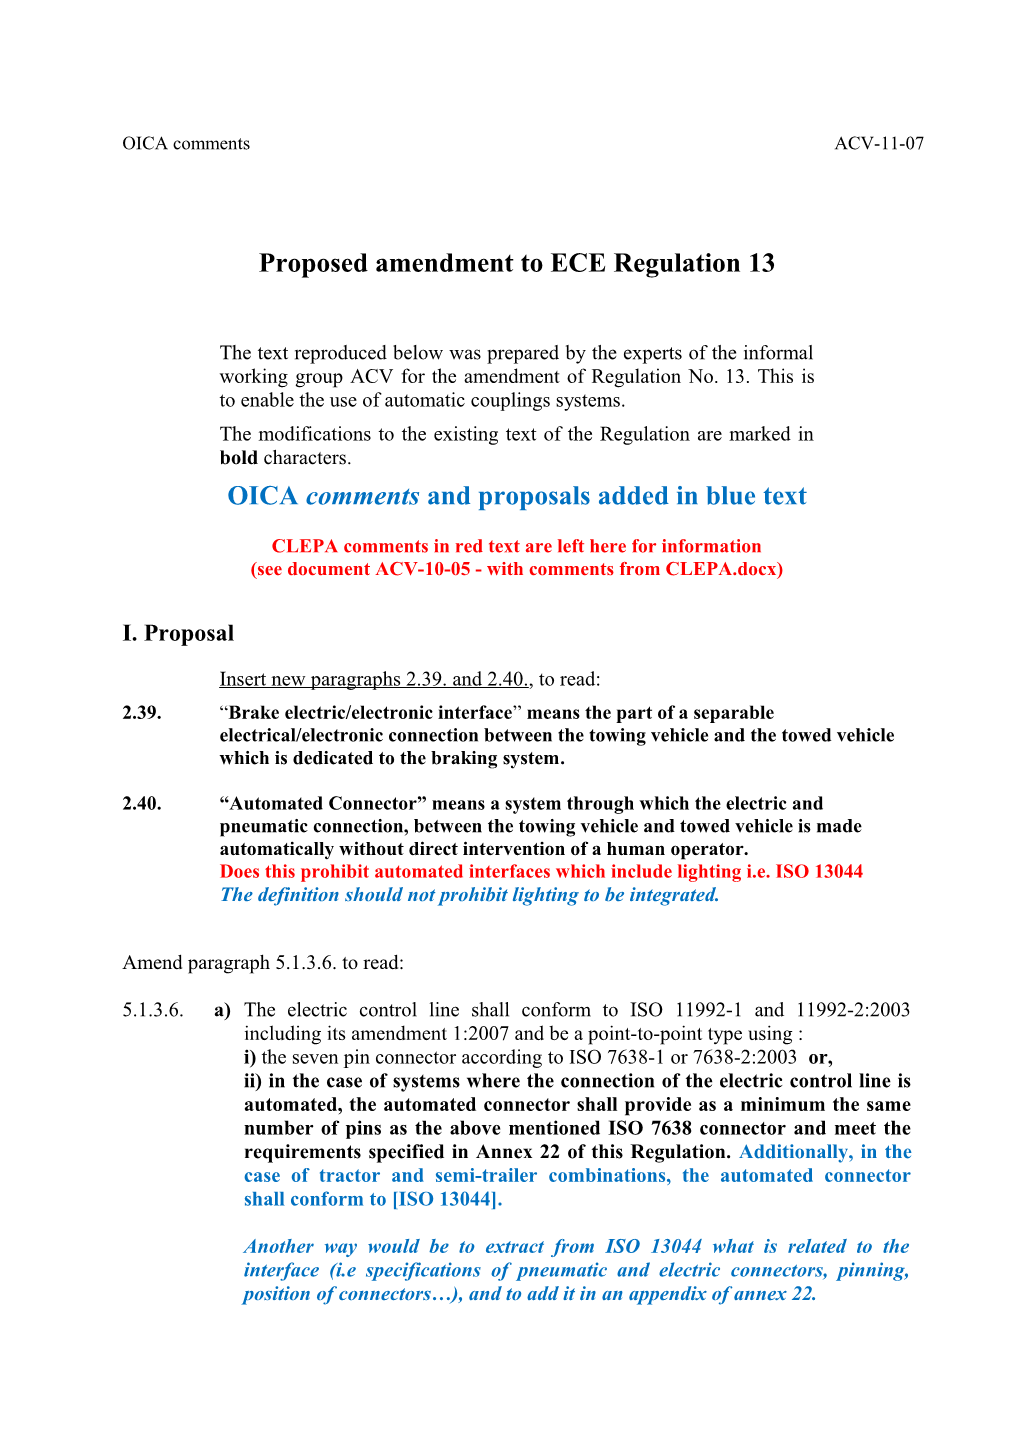 Proposed Amendment to ECE Regulation 13 for Consideration by the GRRF ACV Informal Working Group